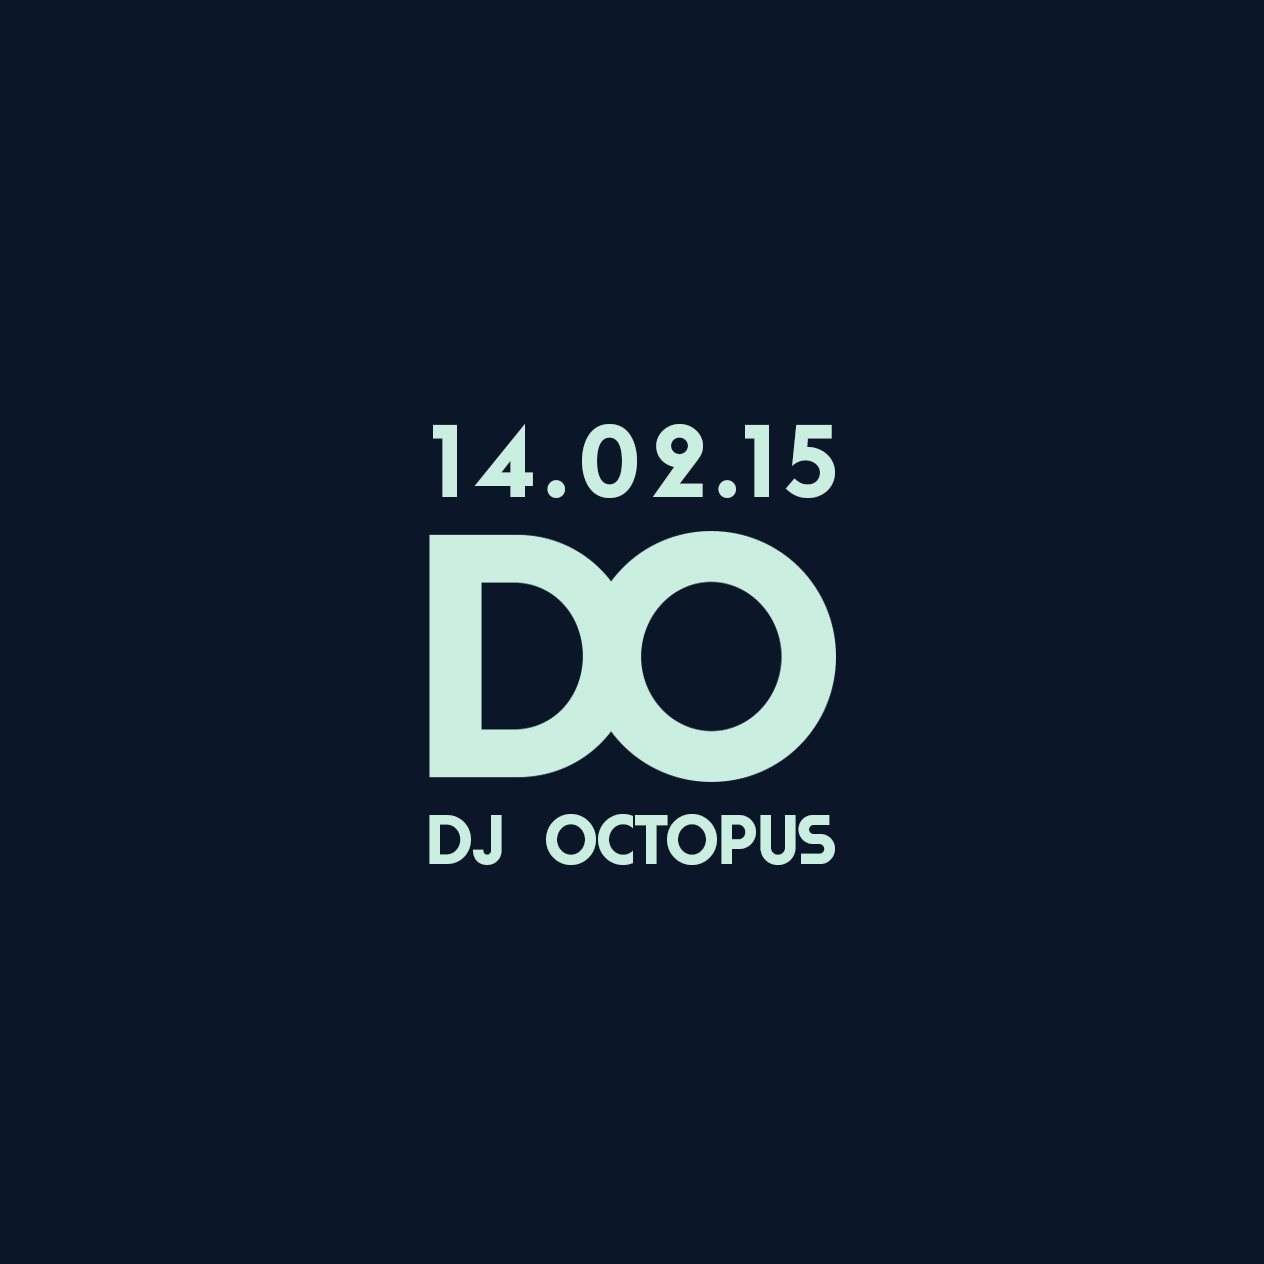 Template Showcase with DJ Octopus - フライヤー表